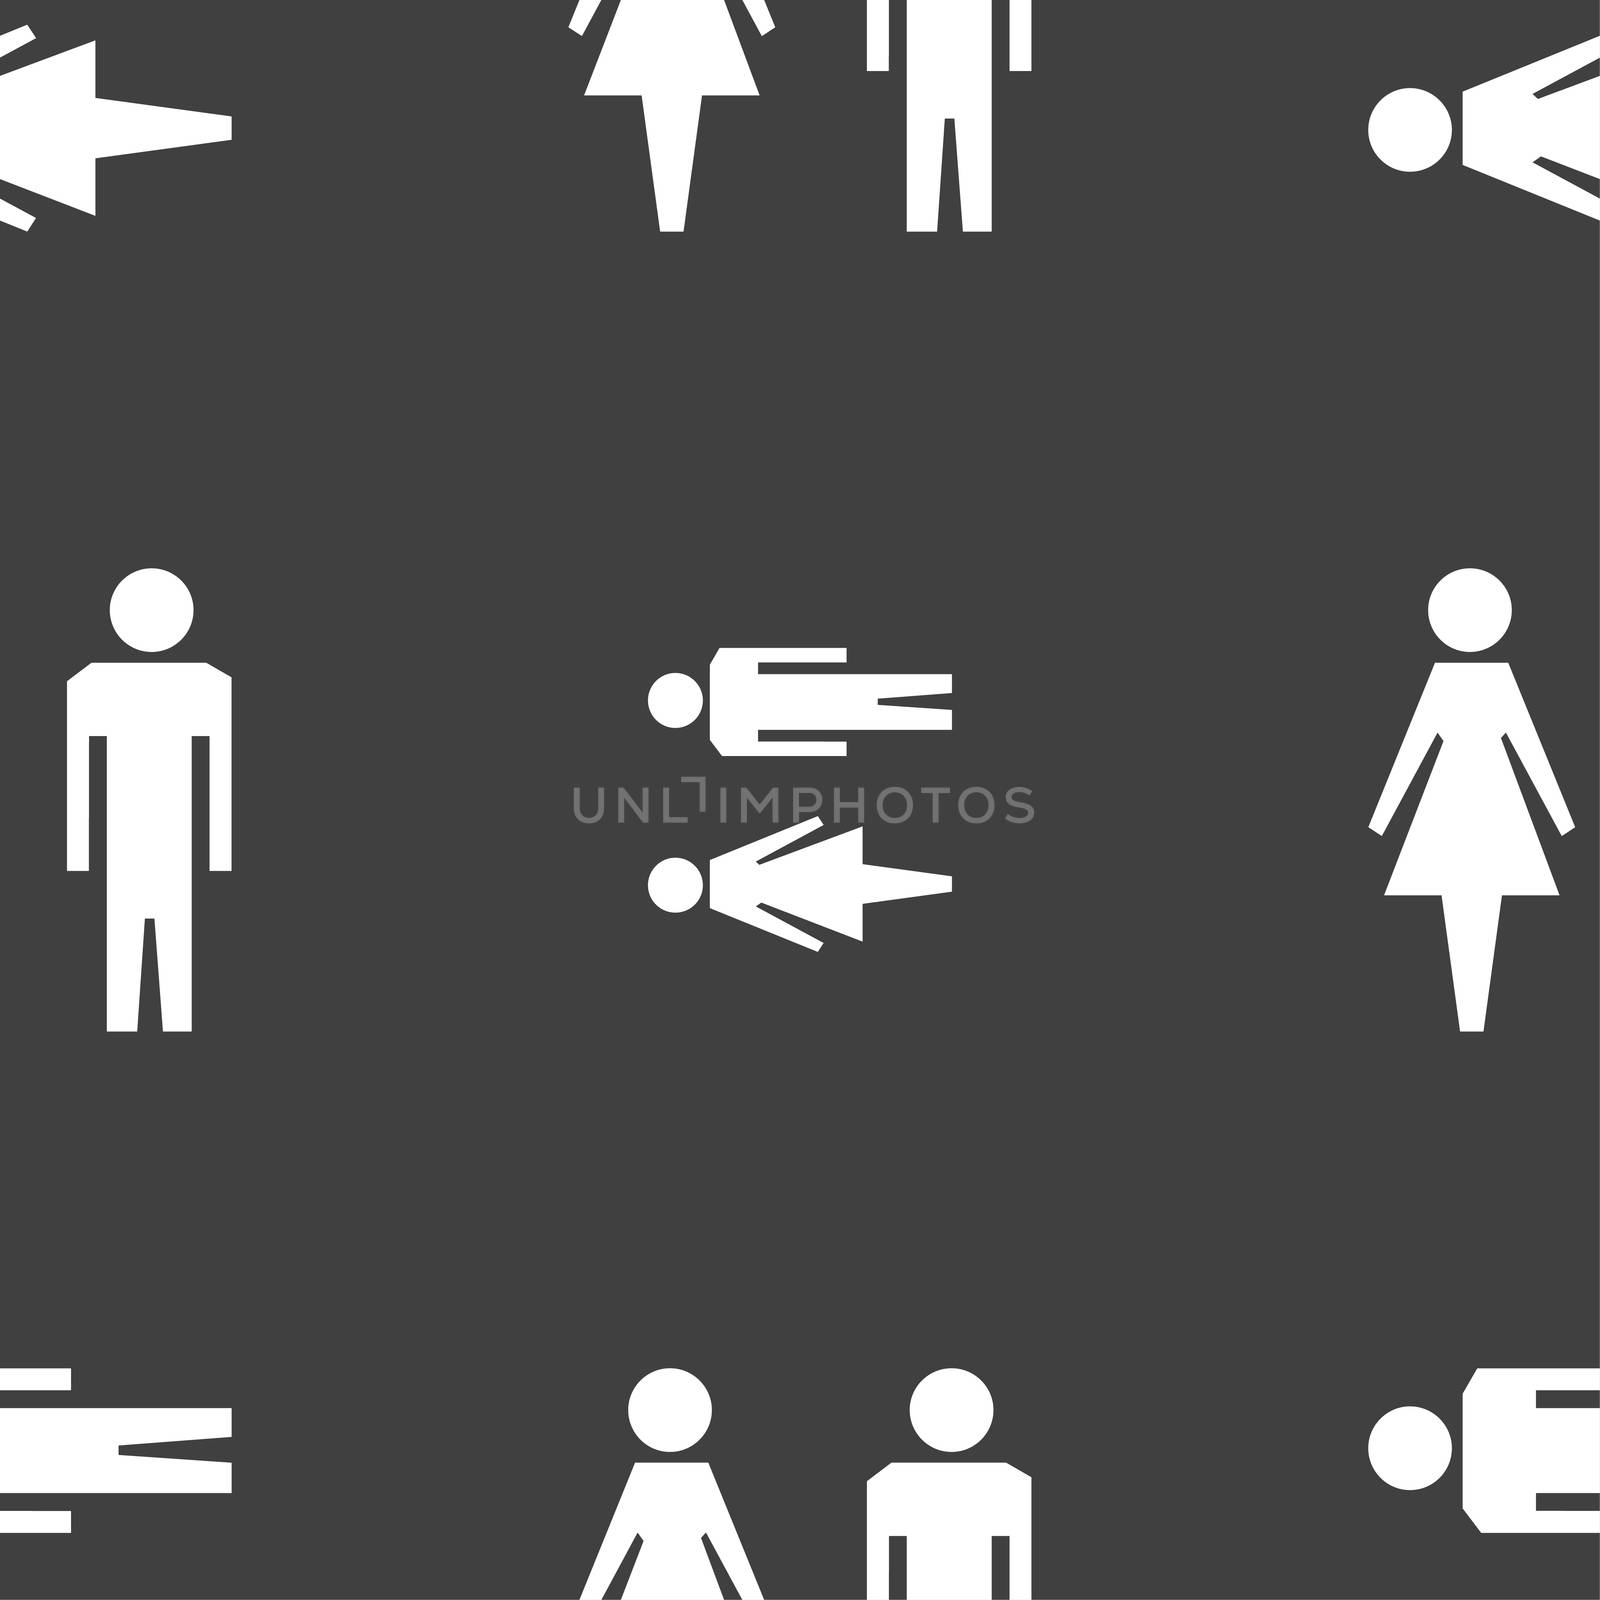 WC sign icon. Toilet symbol. Male and Female toilet. Seamless pattern on a gray background. illustration